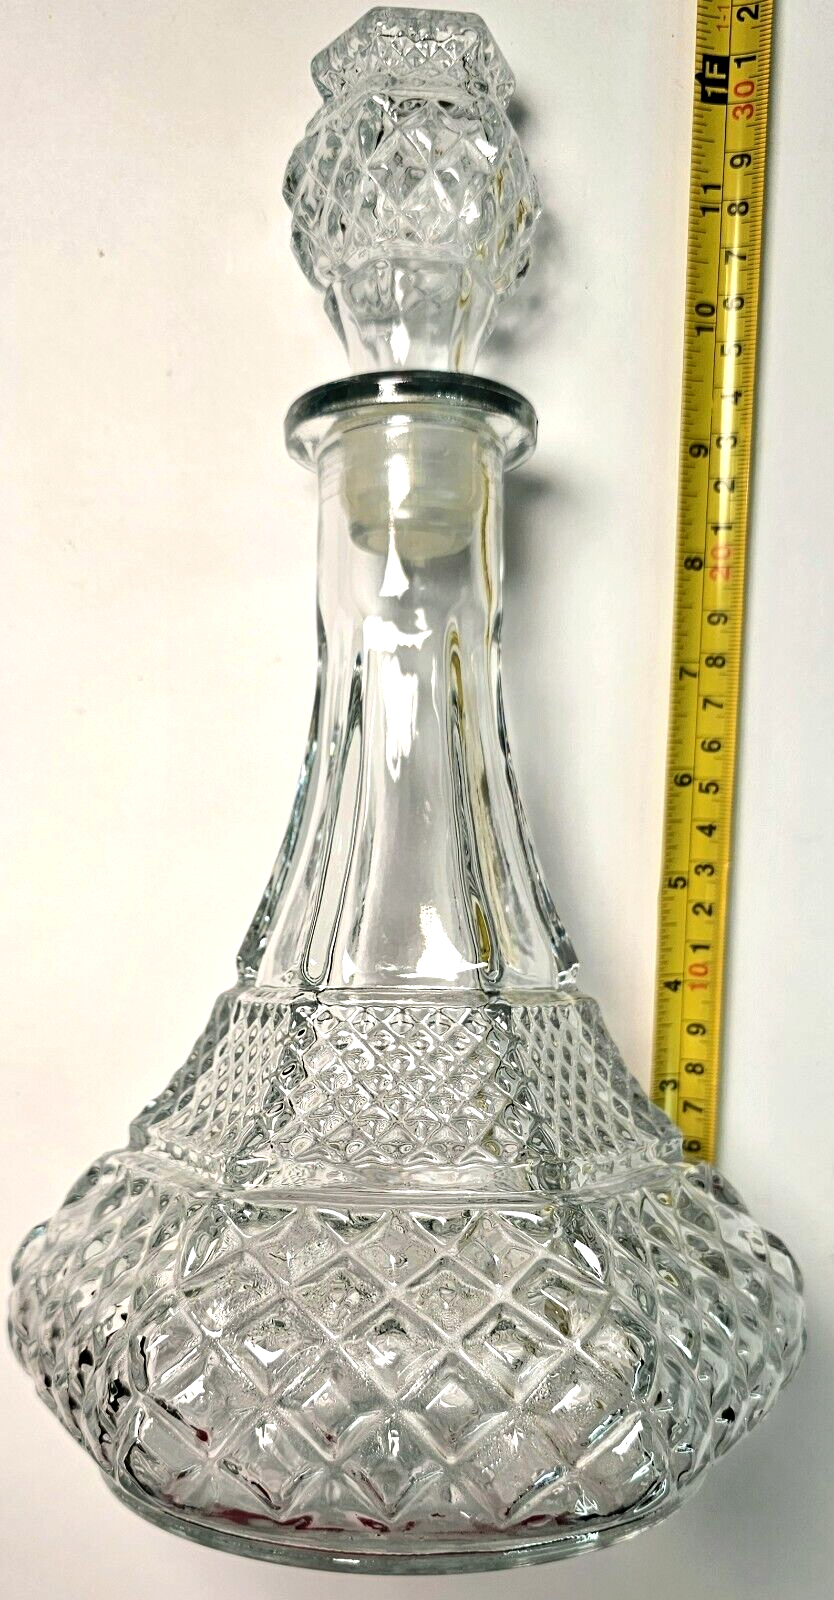 Primary image for Wexford Clear Criss-Cross Diamond Hexagon Wine Whiskey Ship Decanter & Stopper